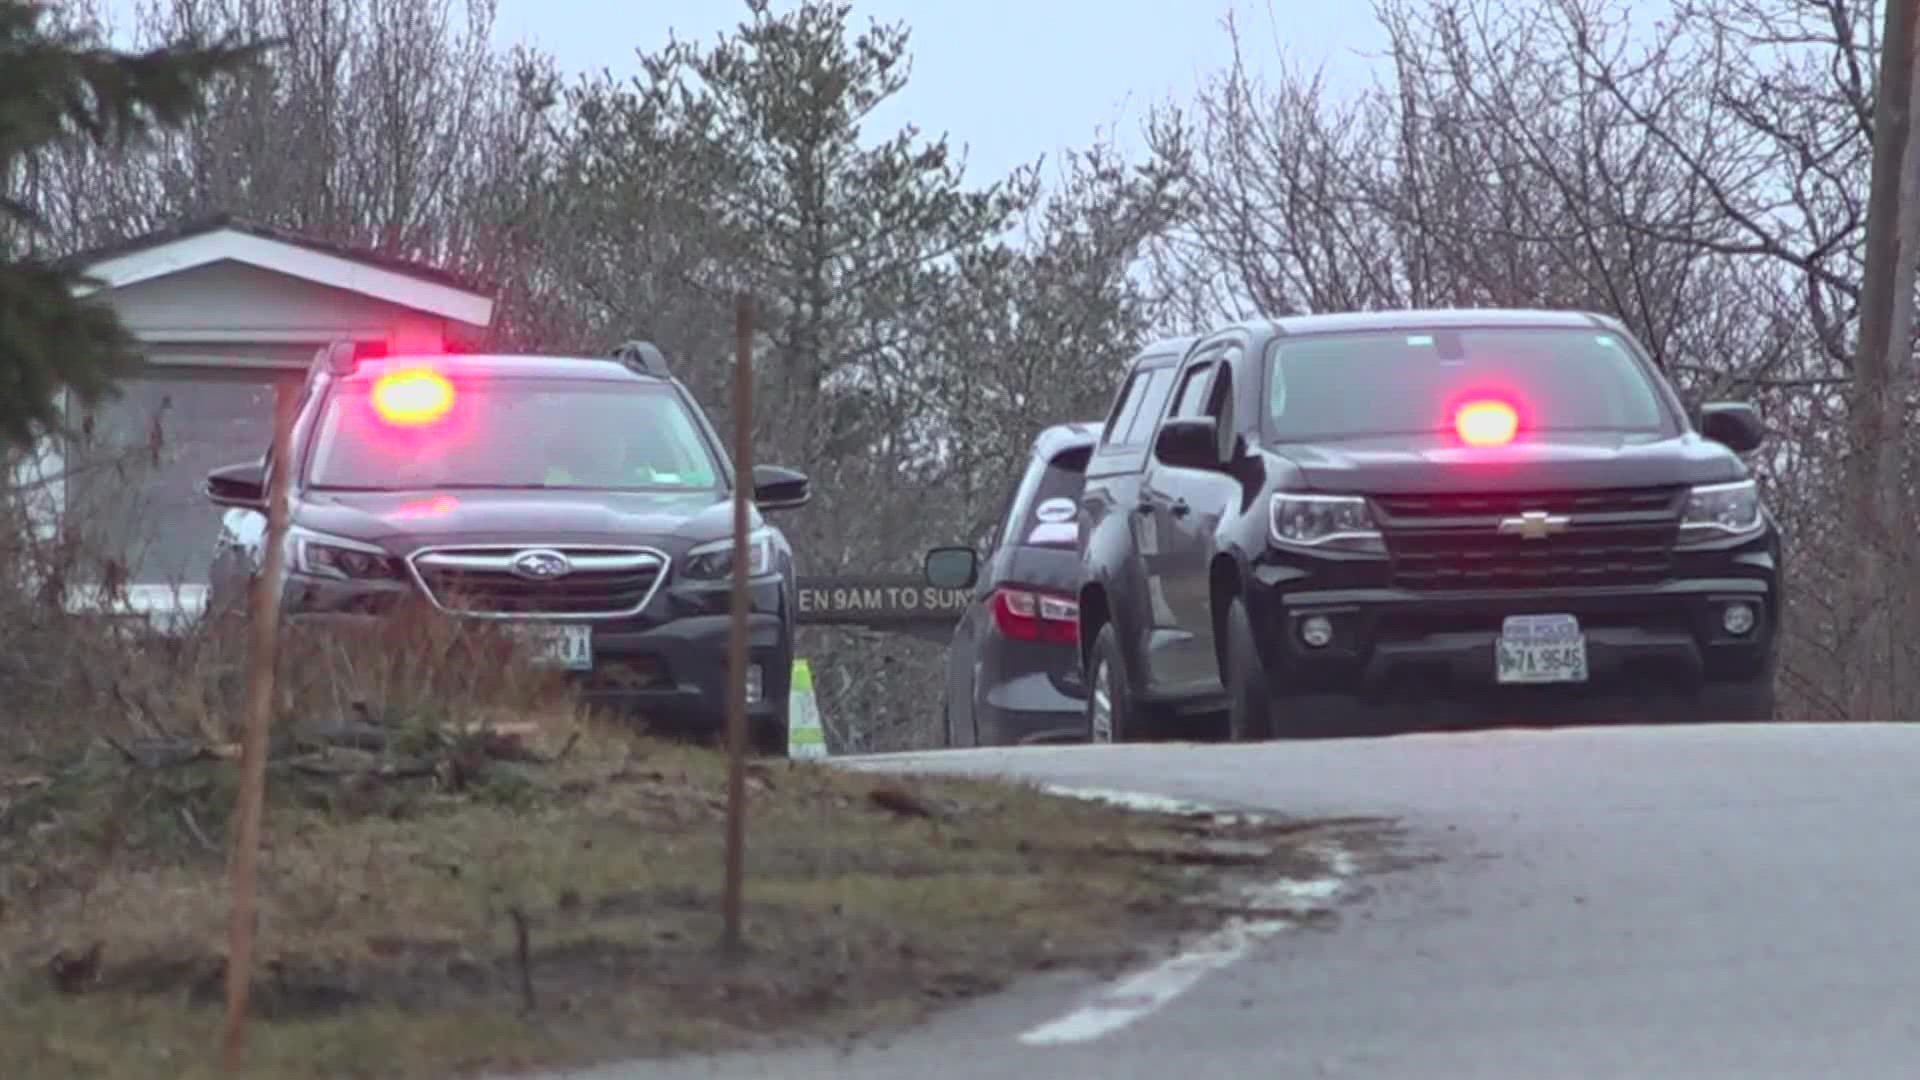 NEWS CENTER Maine reported five missing people since Christmas and two have been found. Game Wardens say there is no increase, but holidays are a sensitive time.